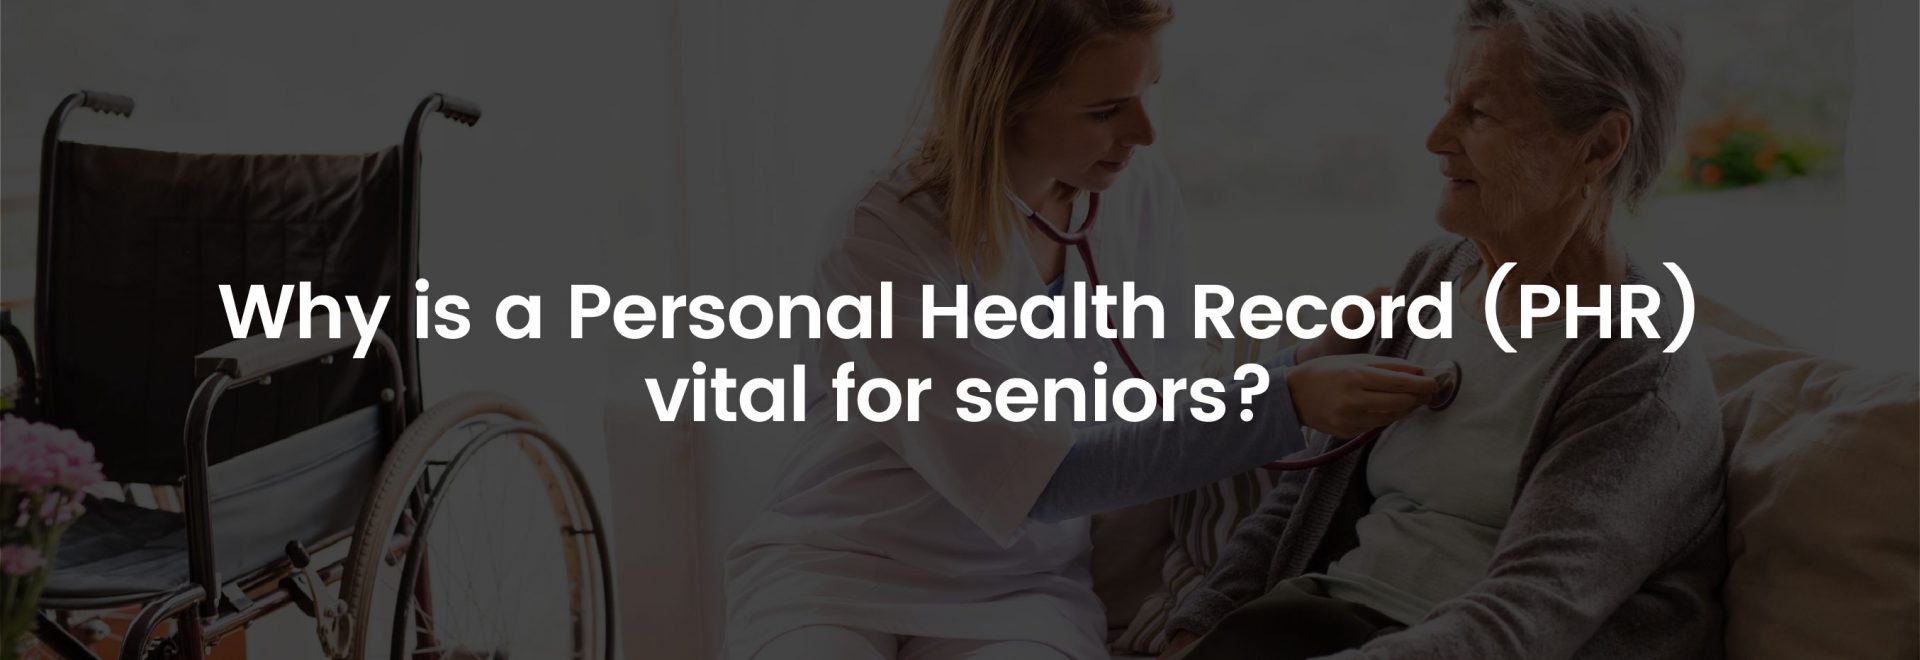 Why is a Personal Health Record Vital for Seniors? | Banner Image